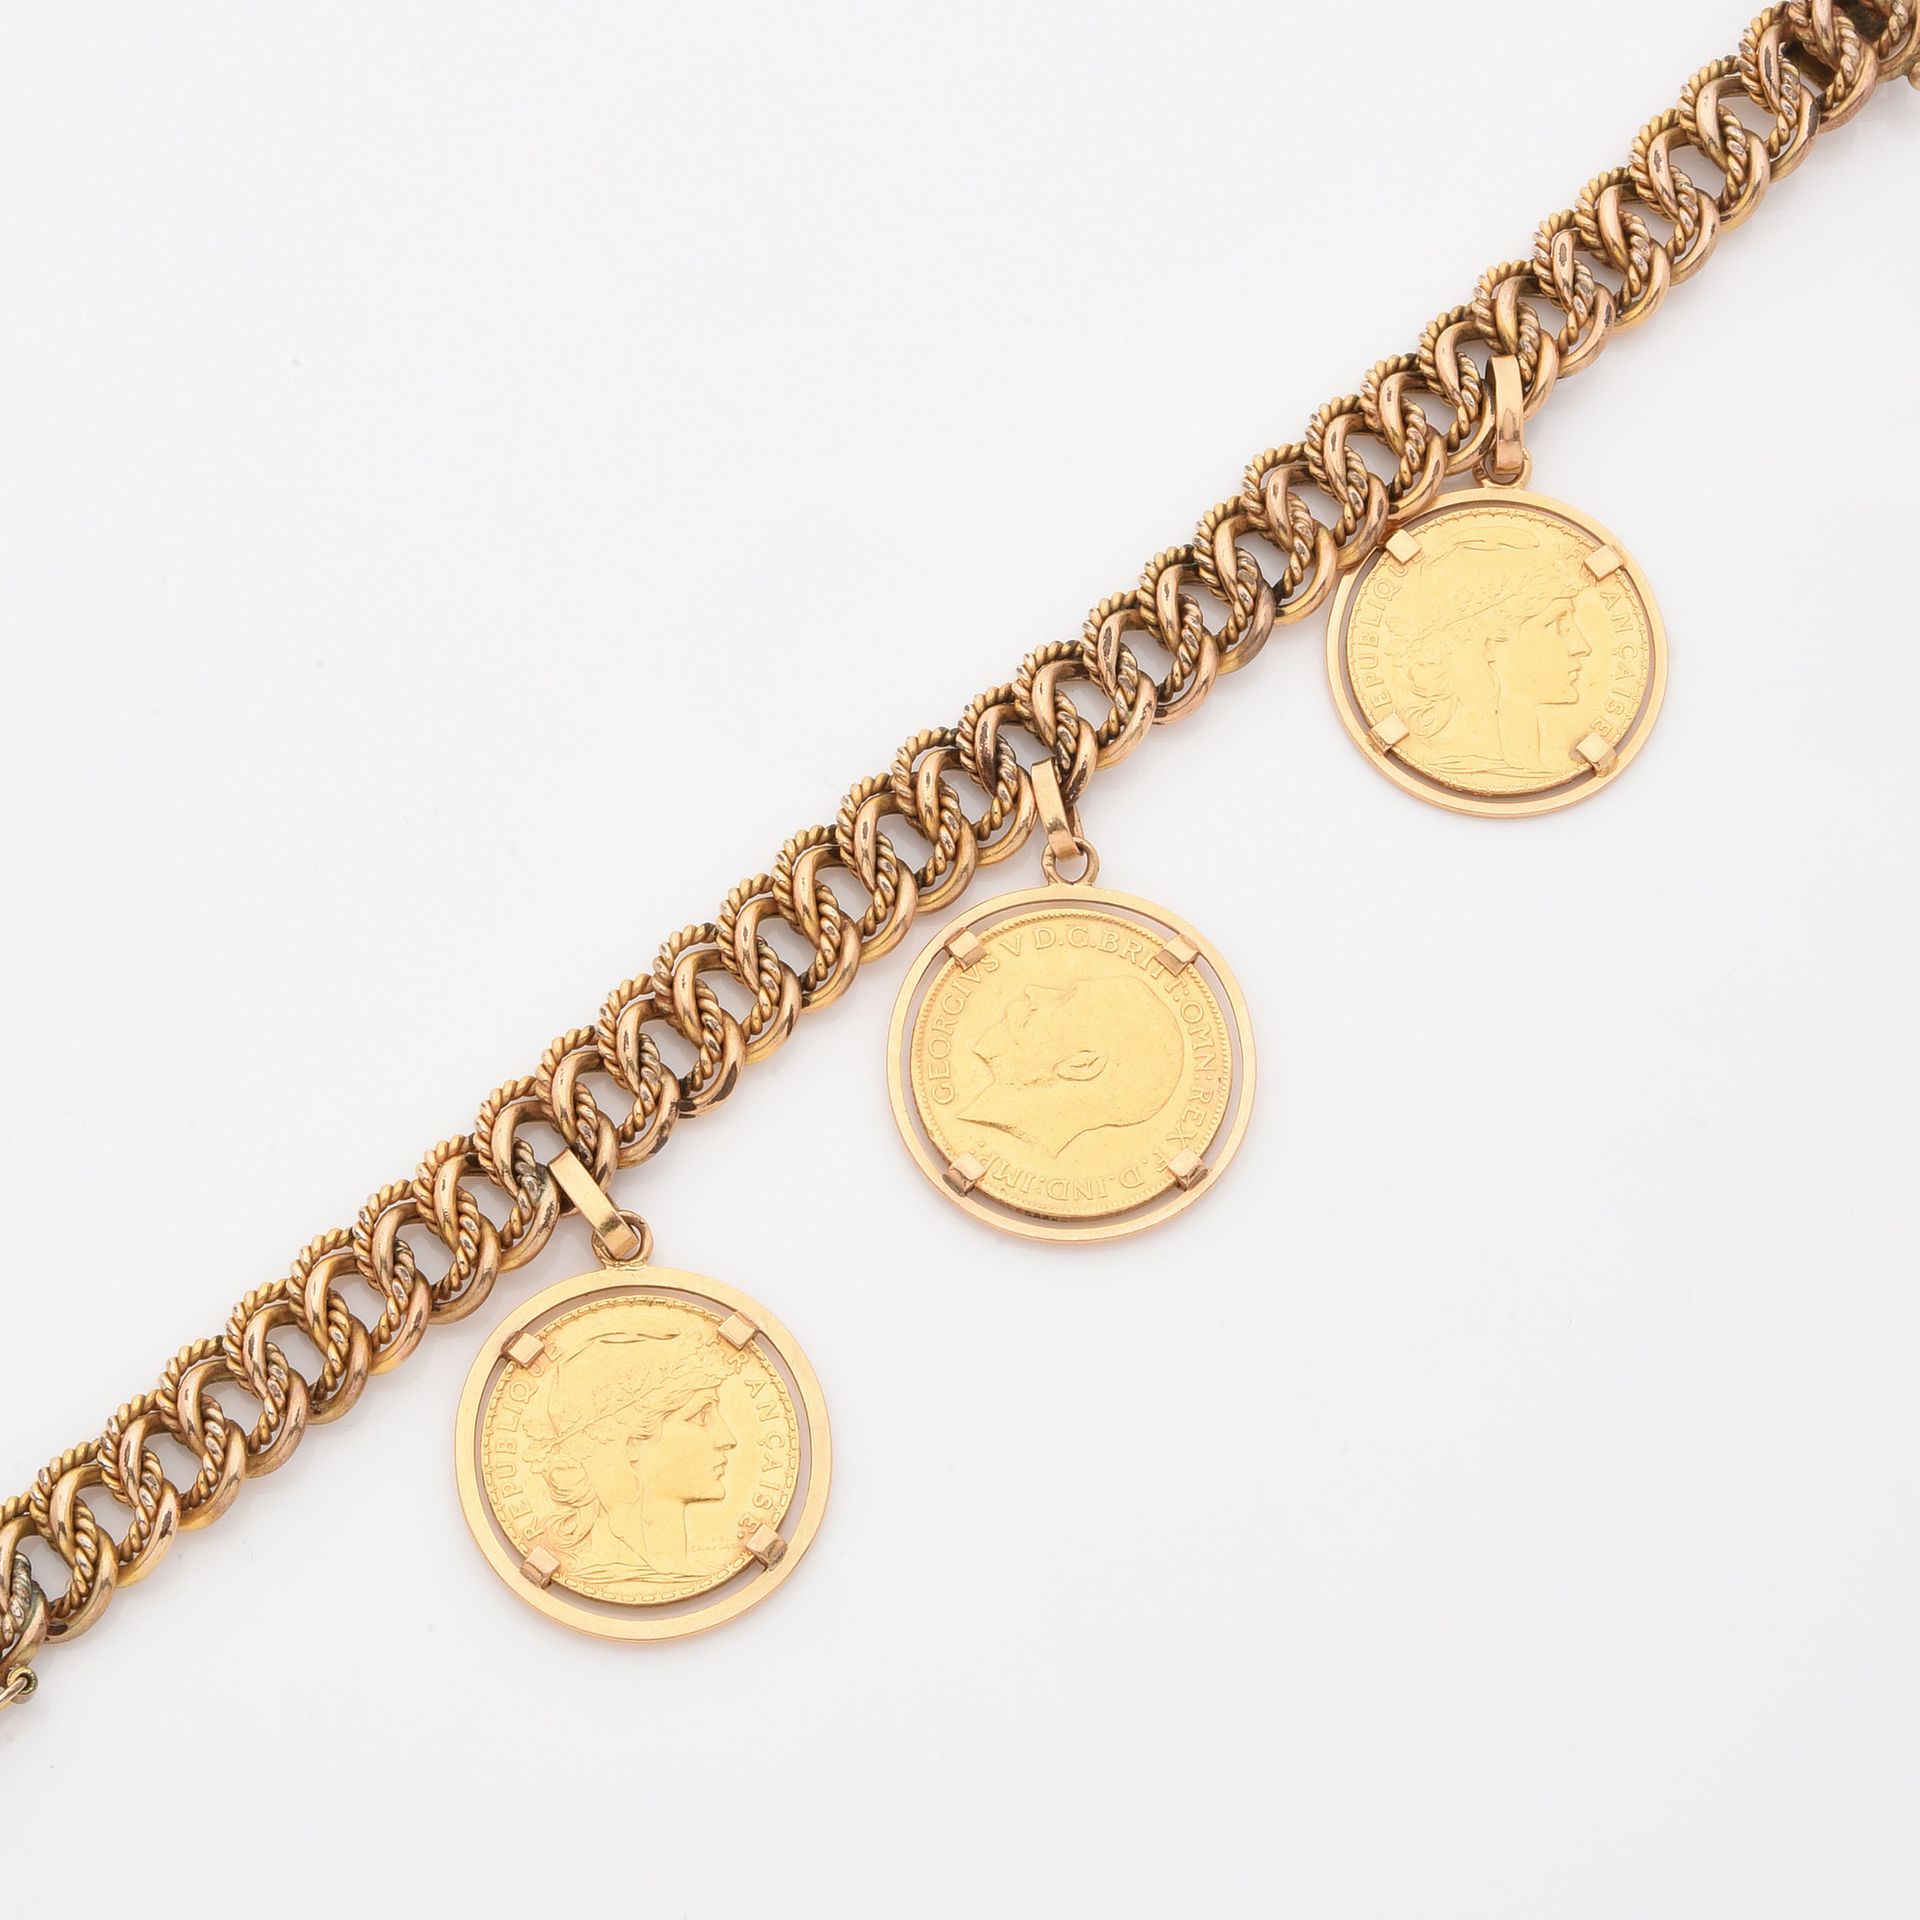 Null BRACELET GOURMETTE
Yellow gold, holding three yellow gold coins (two 20 Fra&hellip;